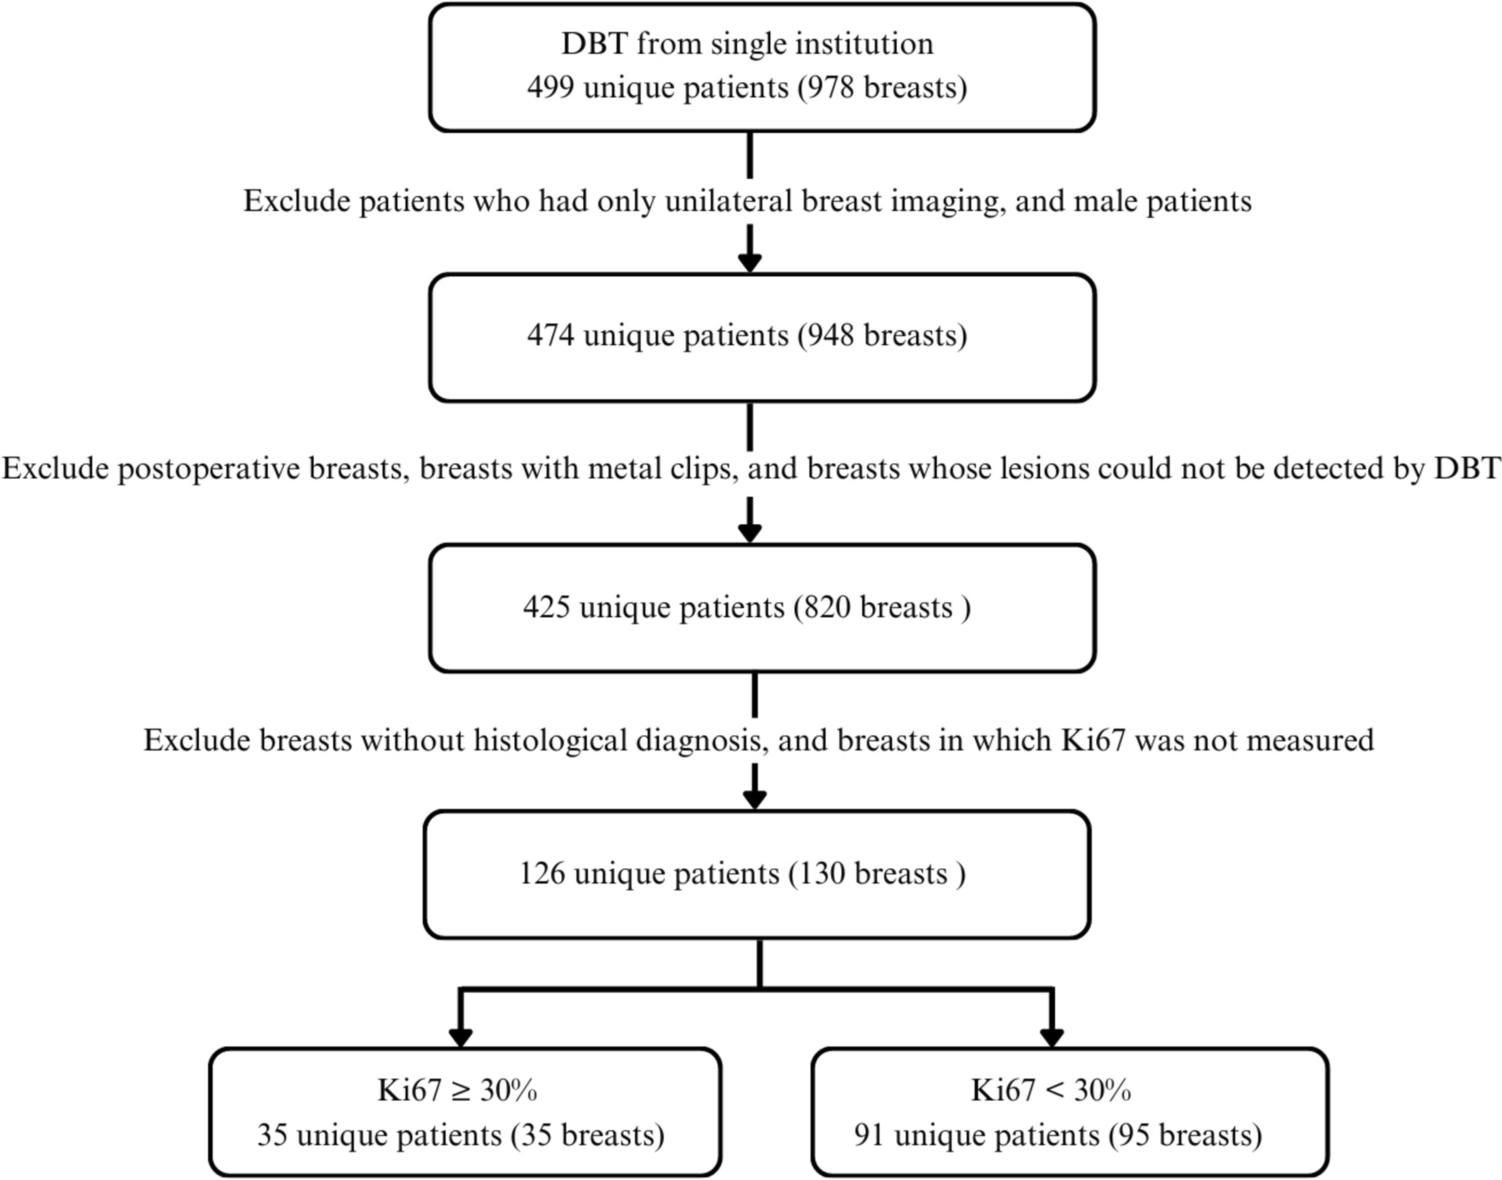 Deep learning model to predict Ki-67 expression of breast cancer using digital breast tomosynthesis